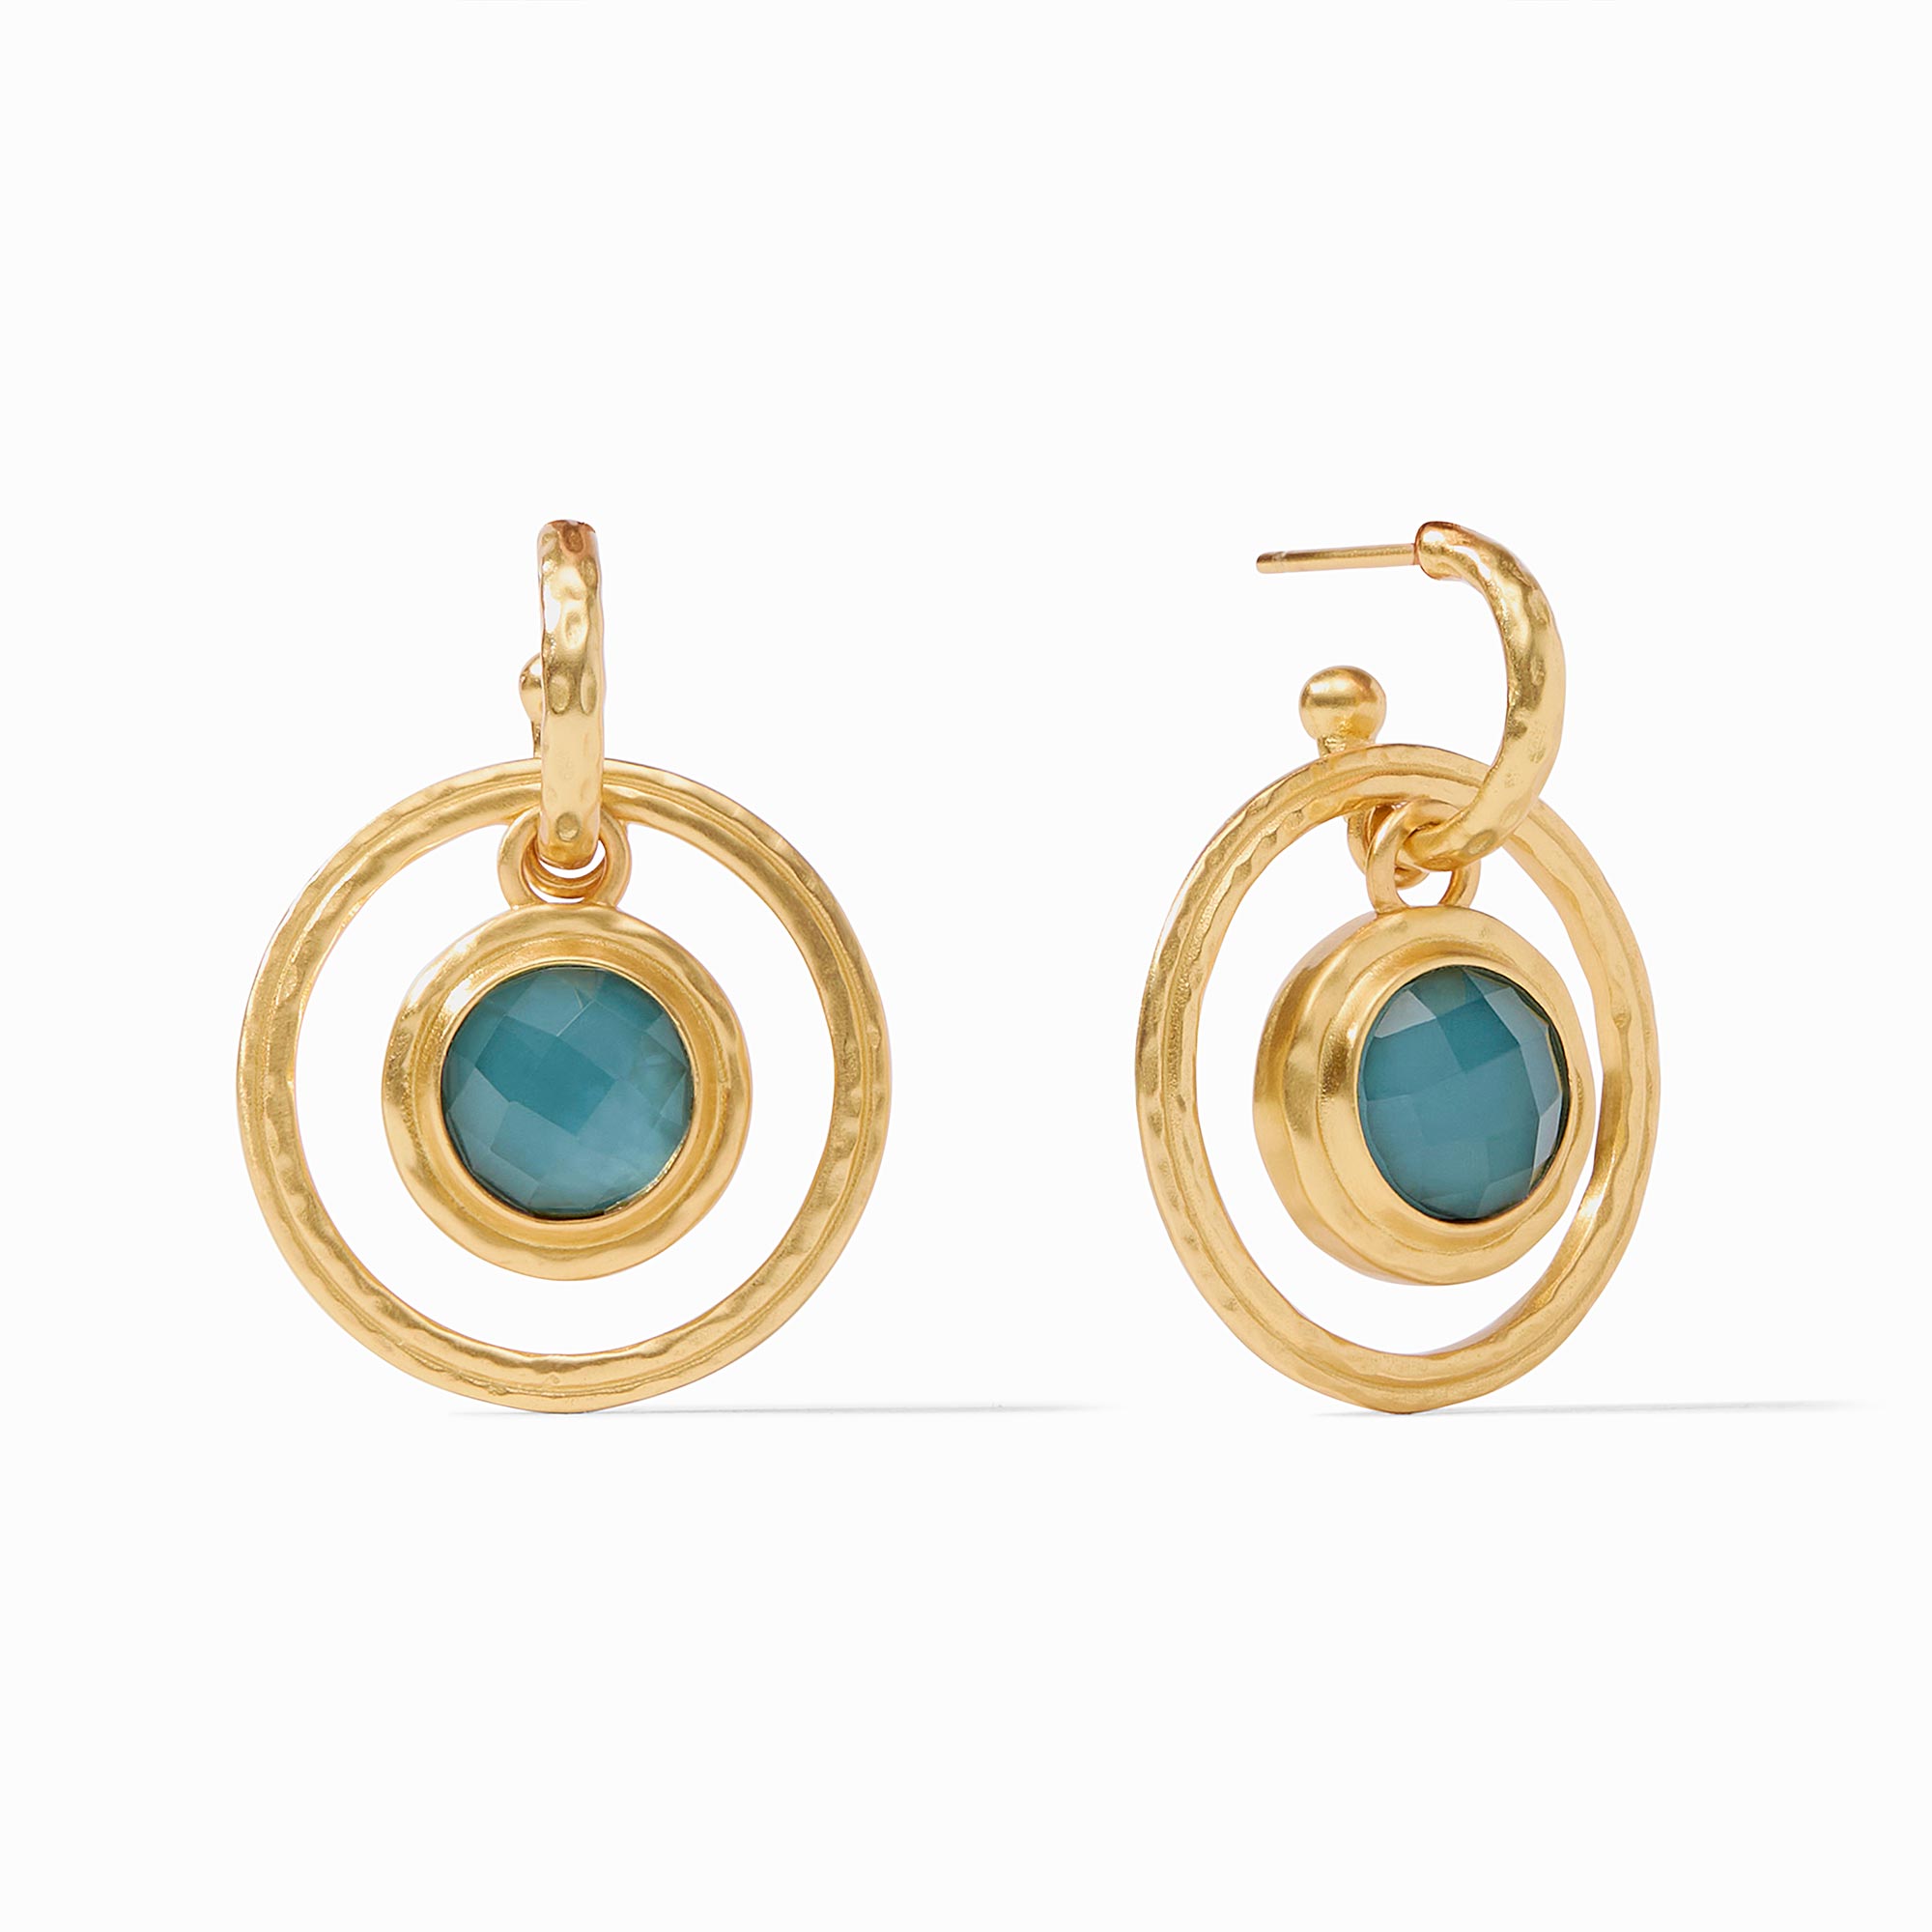 Julie Vos - Astor 6-in-1 Charm Earring, Iridescent Peacock Blue